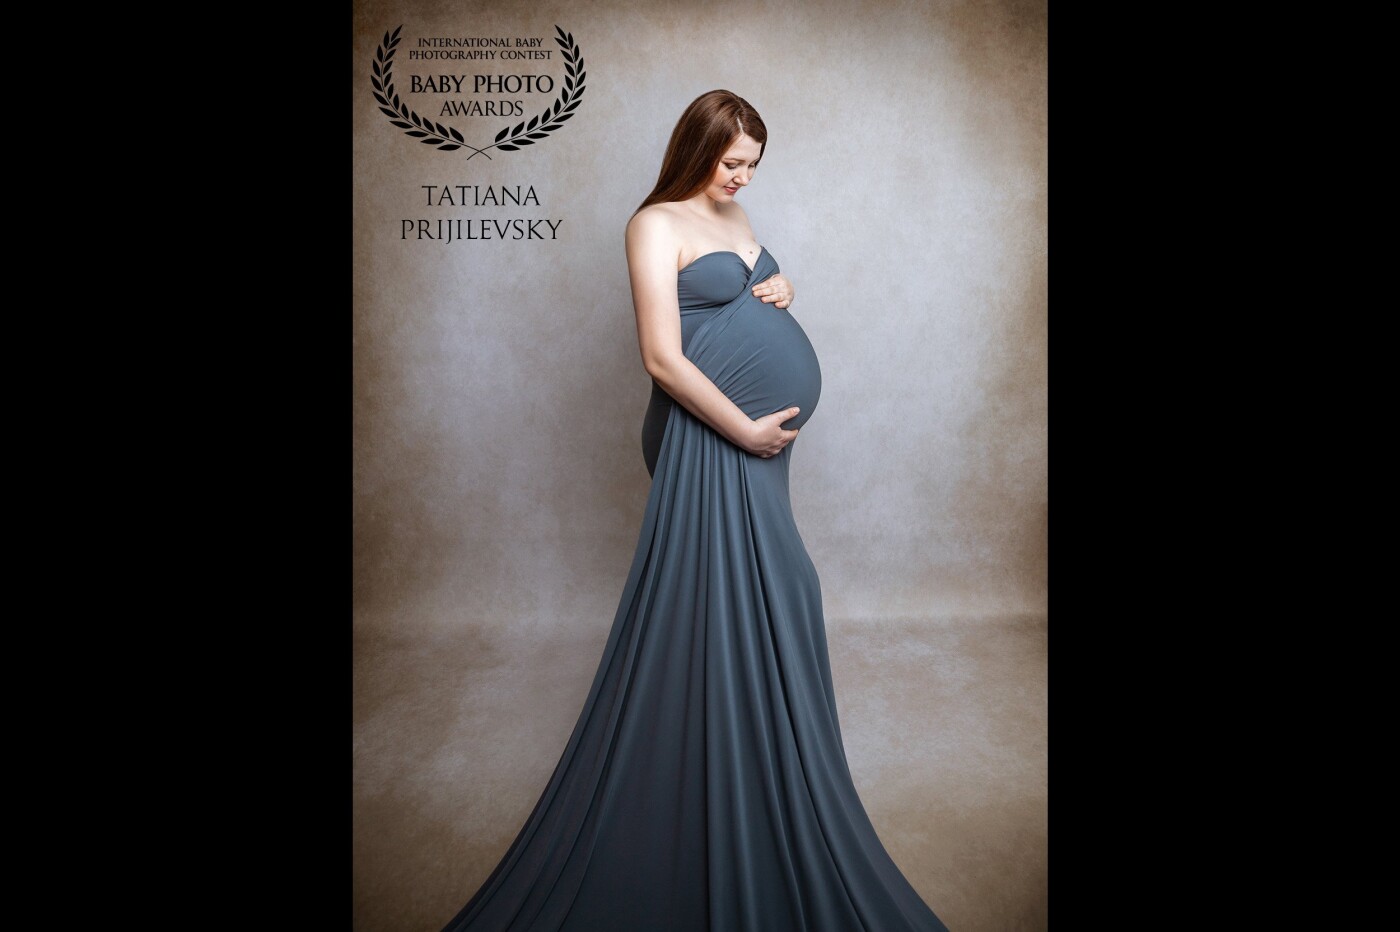 A lot of people get nervous in front of the camera, so I don’t pose a lot. I direct my clients, but I keep them moving, talking, and laughing so they let their guard down and really enjoy the shoot. In my opinion, this is my perfect posing for maternity!